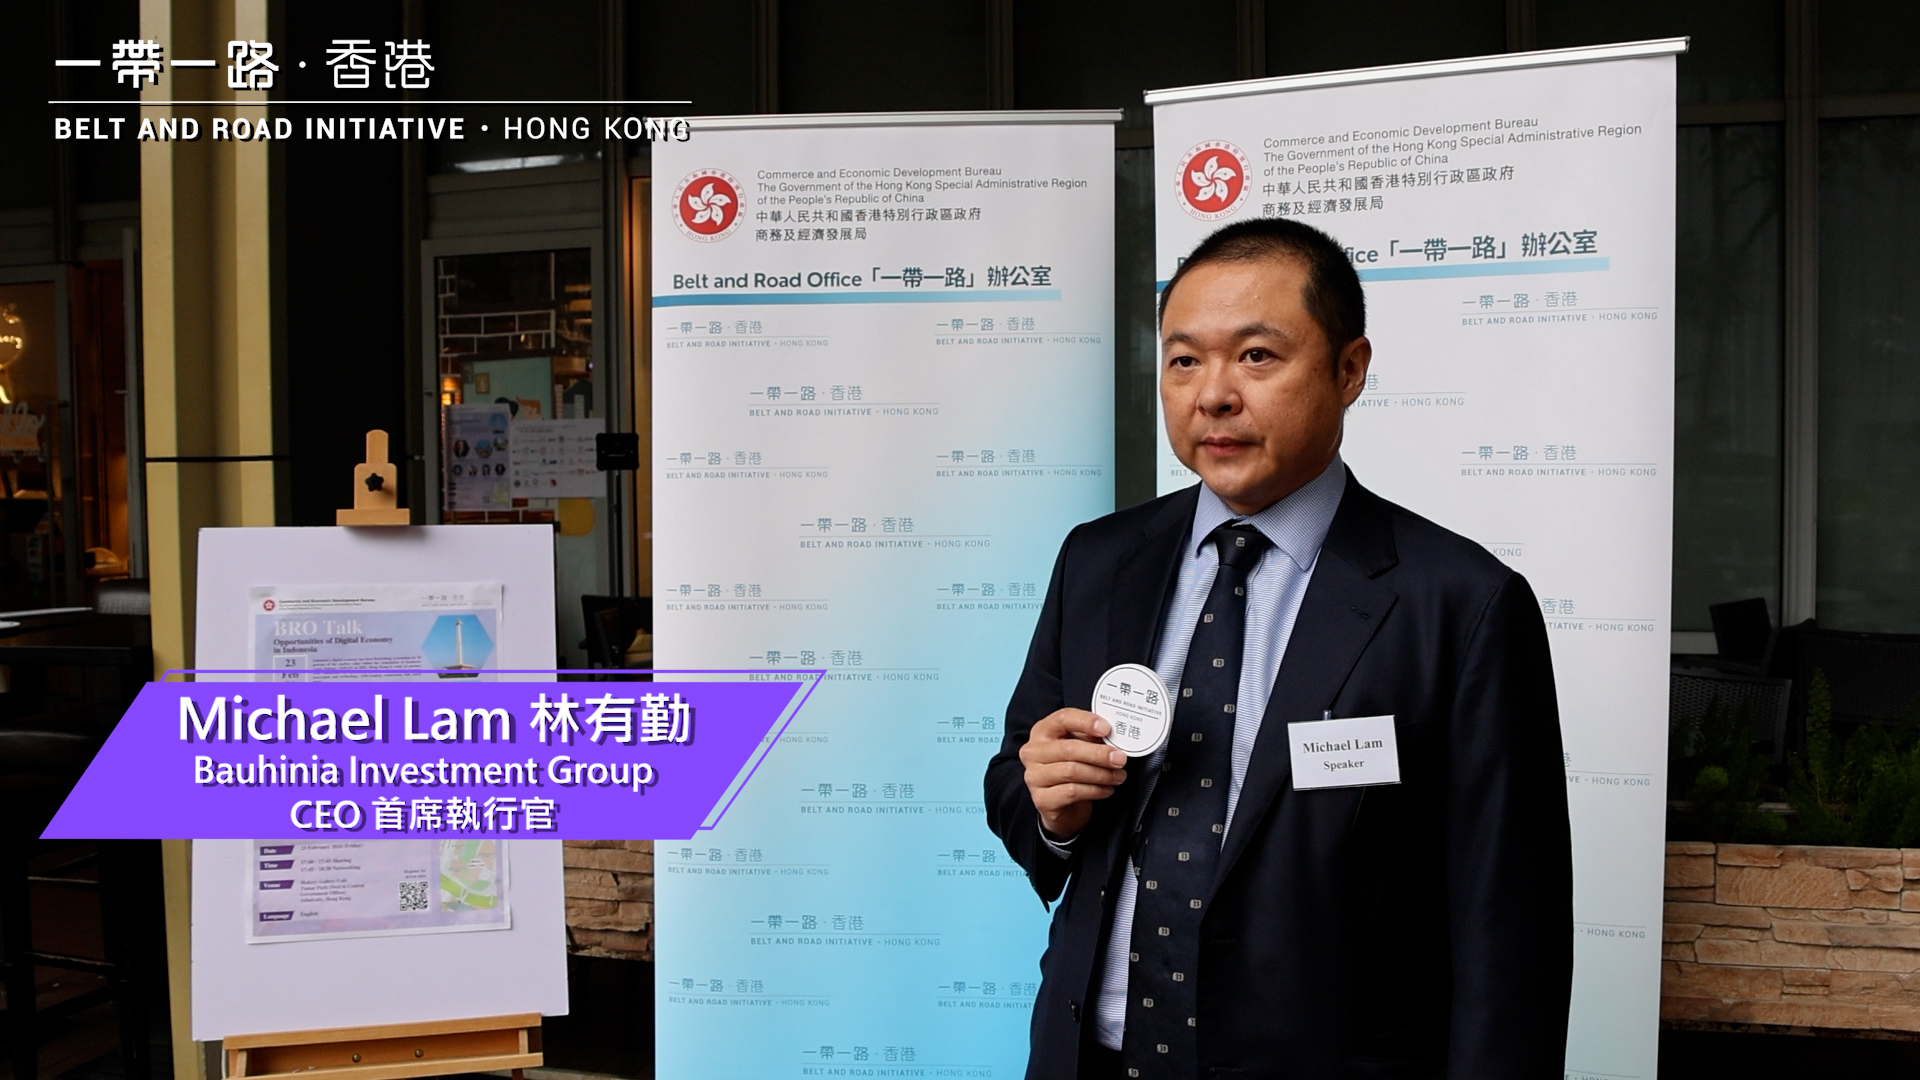 Interview with Mr Michael Lam